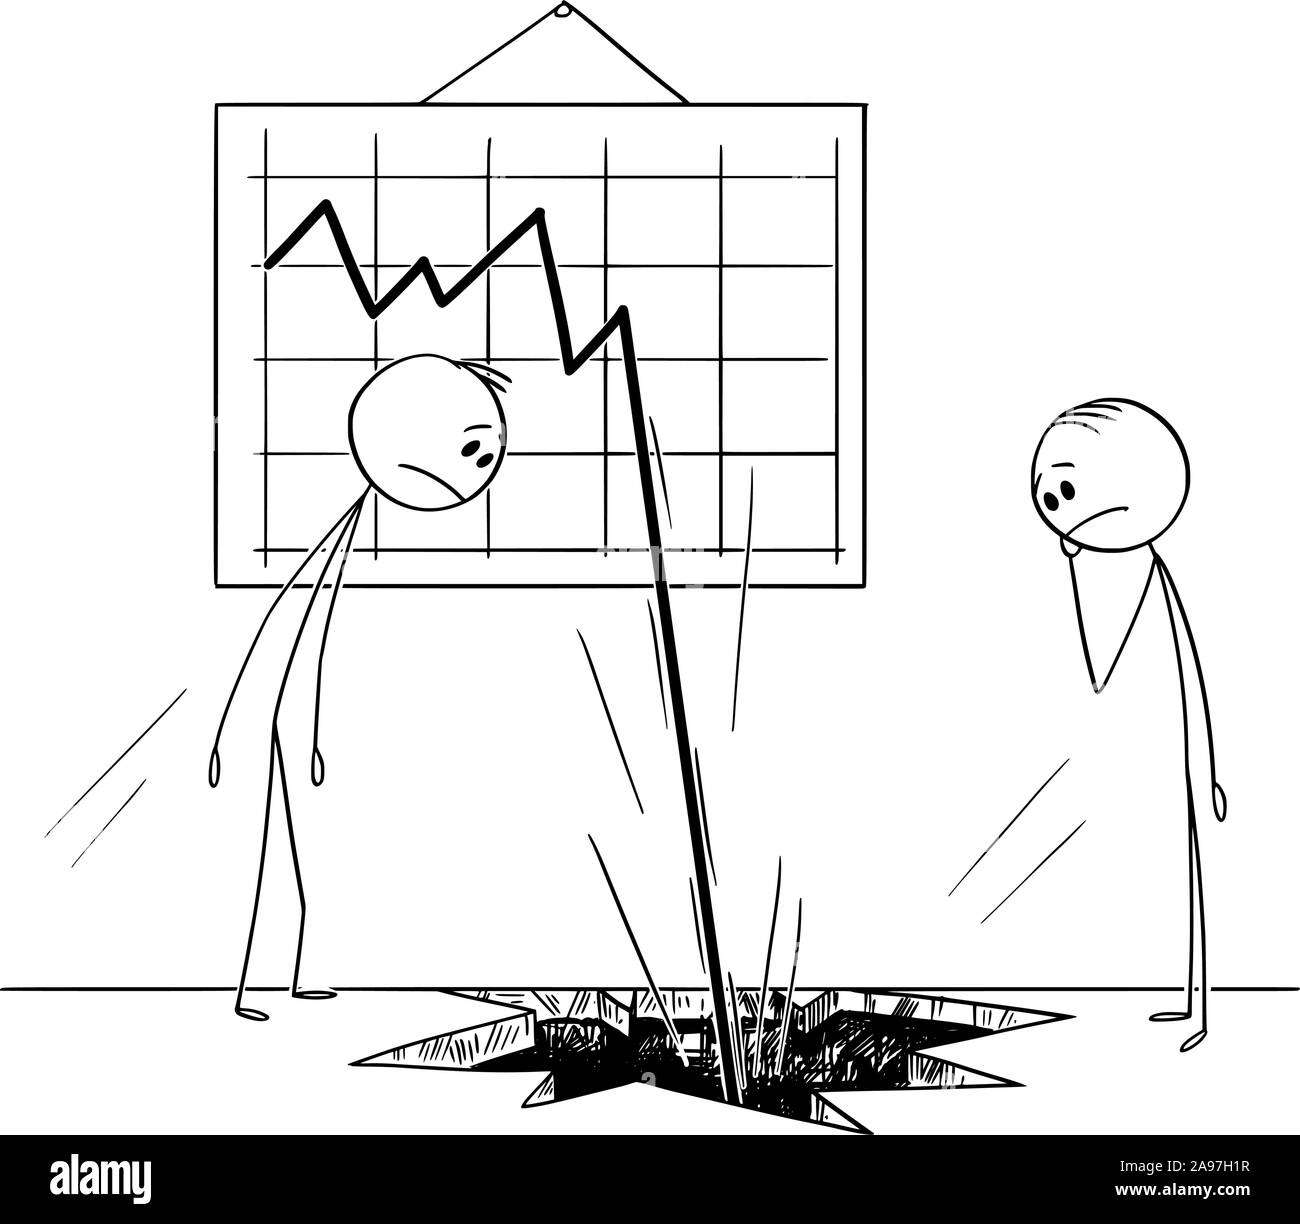 Vector cartoon stick figure drawing conceptual illustration of two businessmen watching frustrated the business chart or graph falling down, and knocking a hole in the ground or floor. Stock Vector